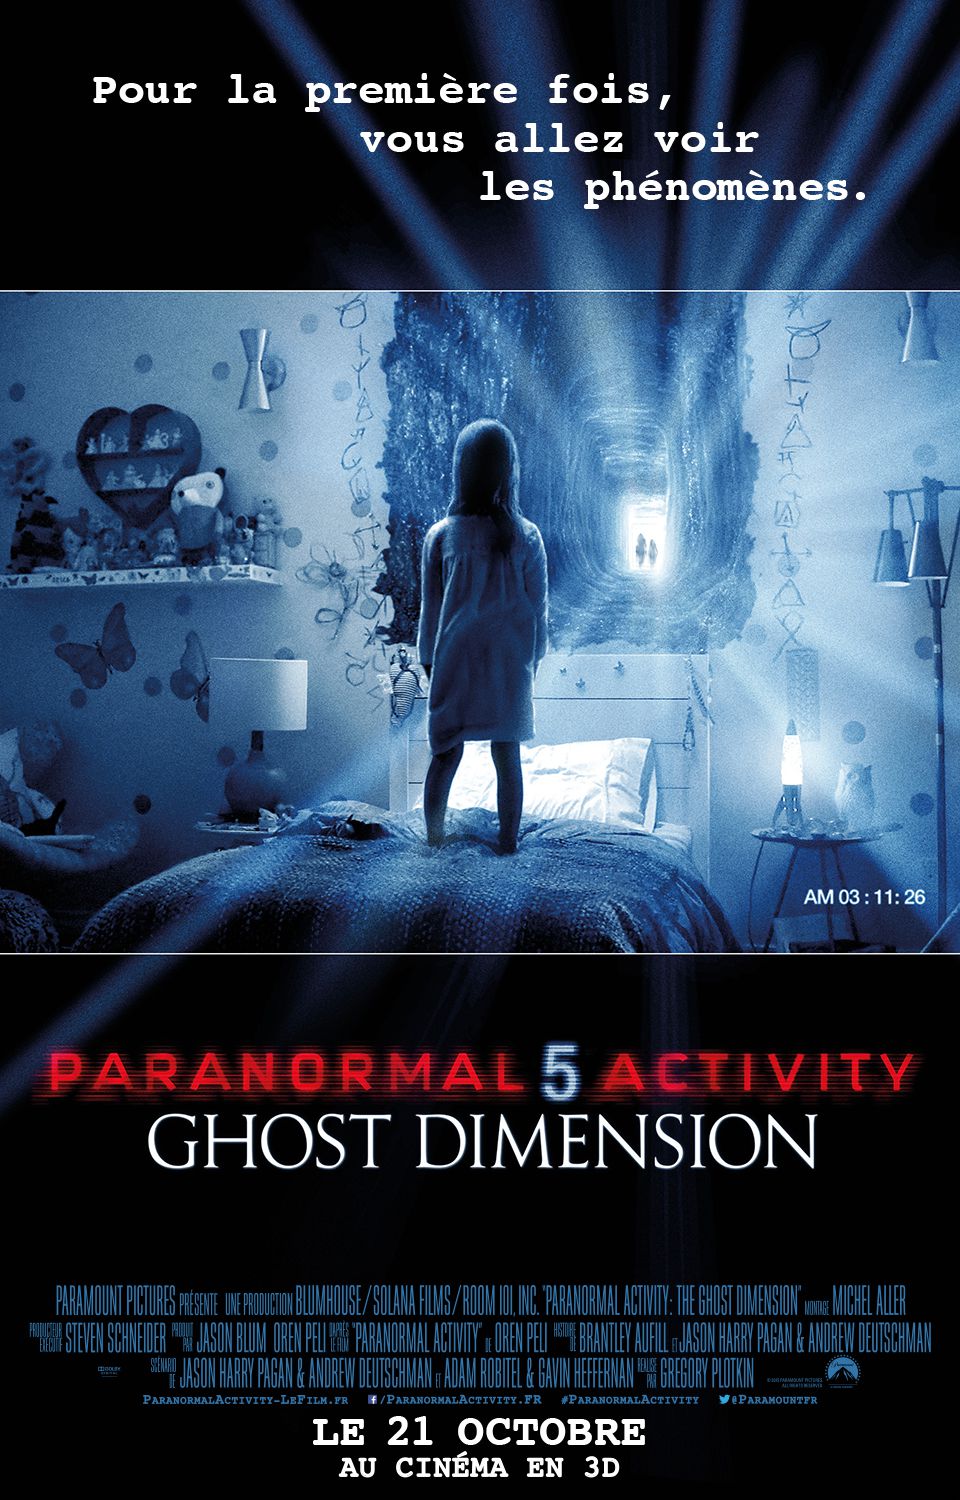 Paranormal Activity 5 : Ghost Dimension - Film (2015) streaming VF gratuit complet